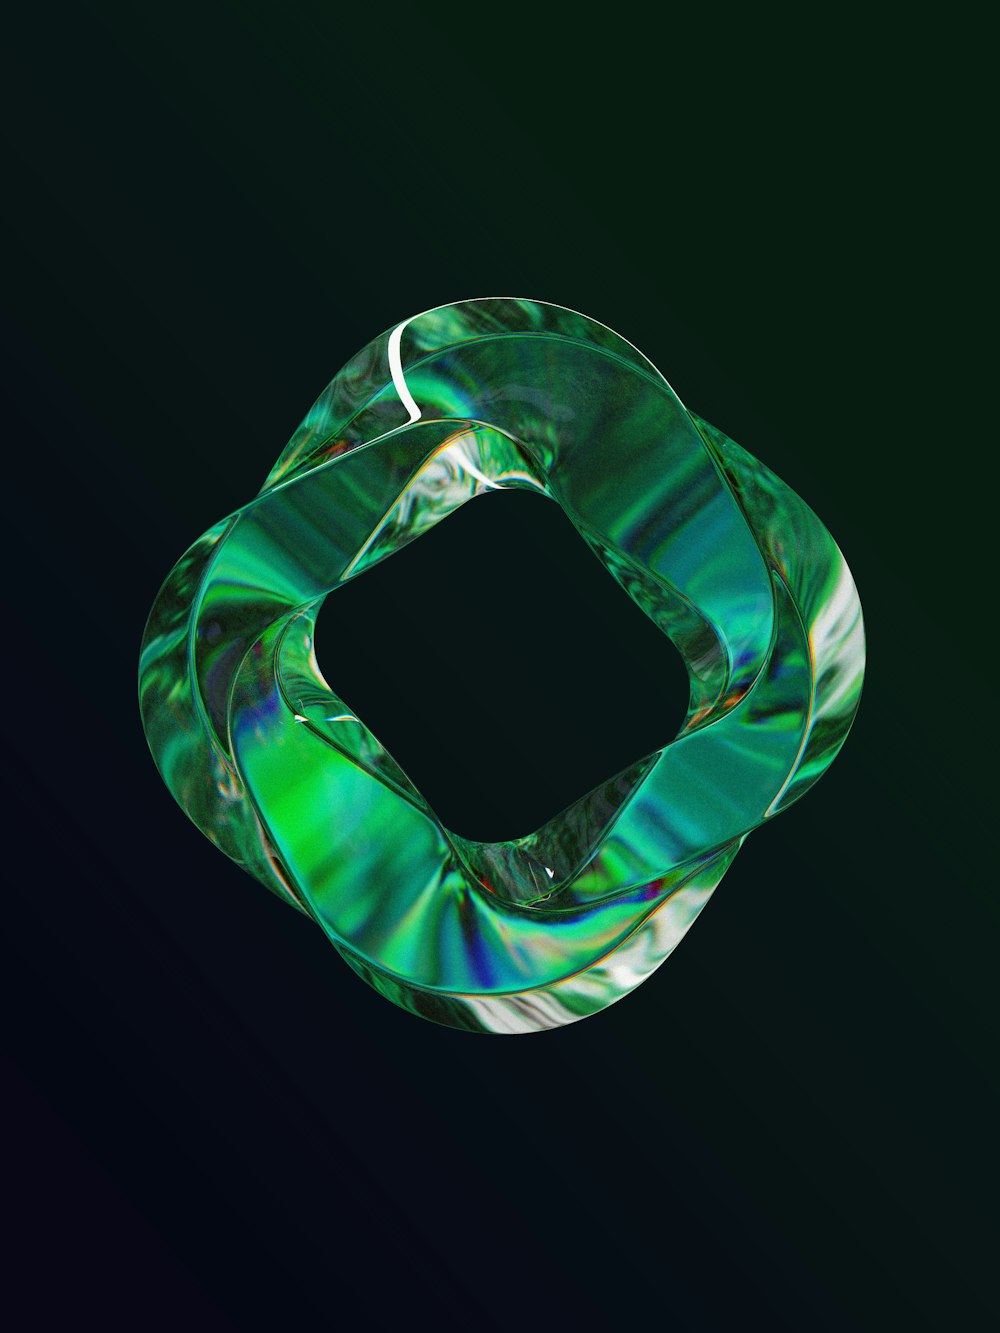 a green and white object on a black background